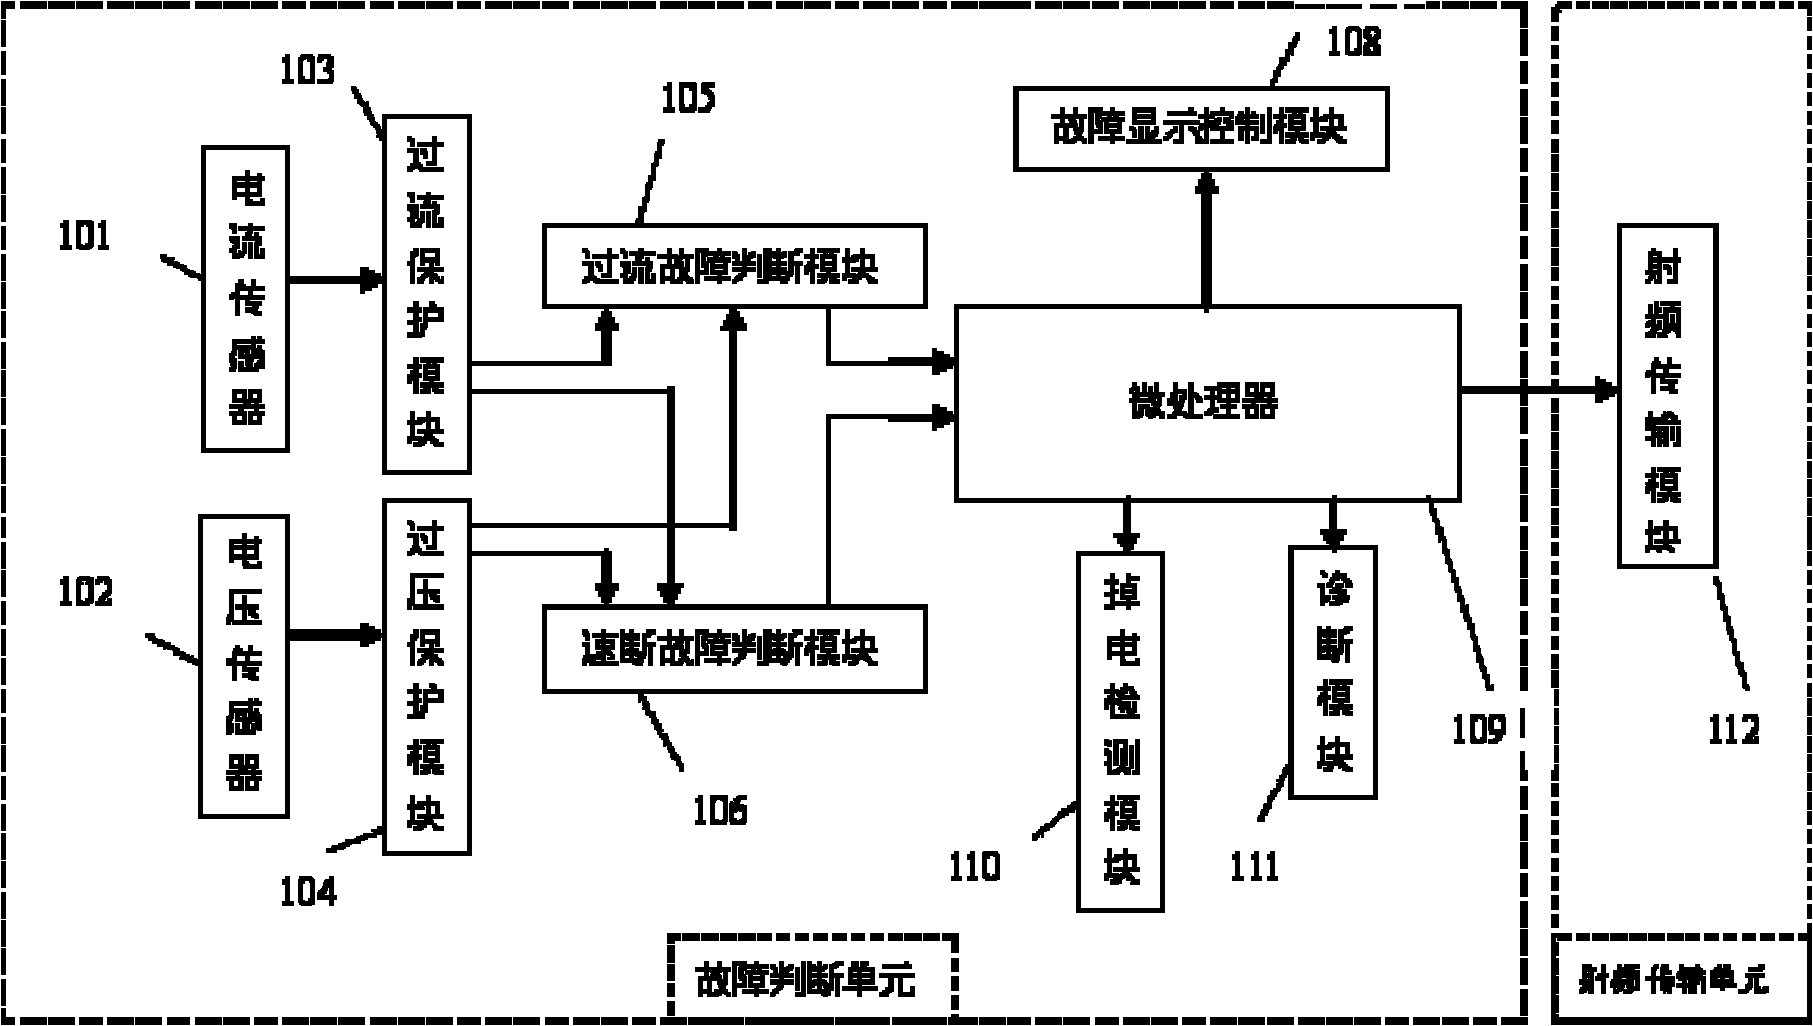 System for automatically judging and positioning faults of automatic blocking and continuous railway power lines in railway distribution network